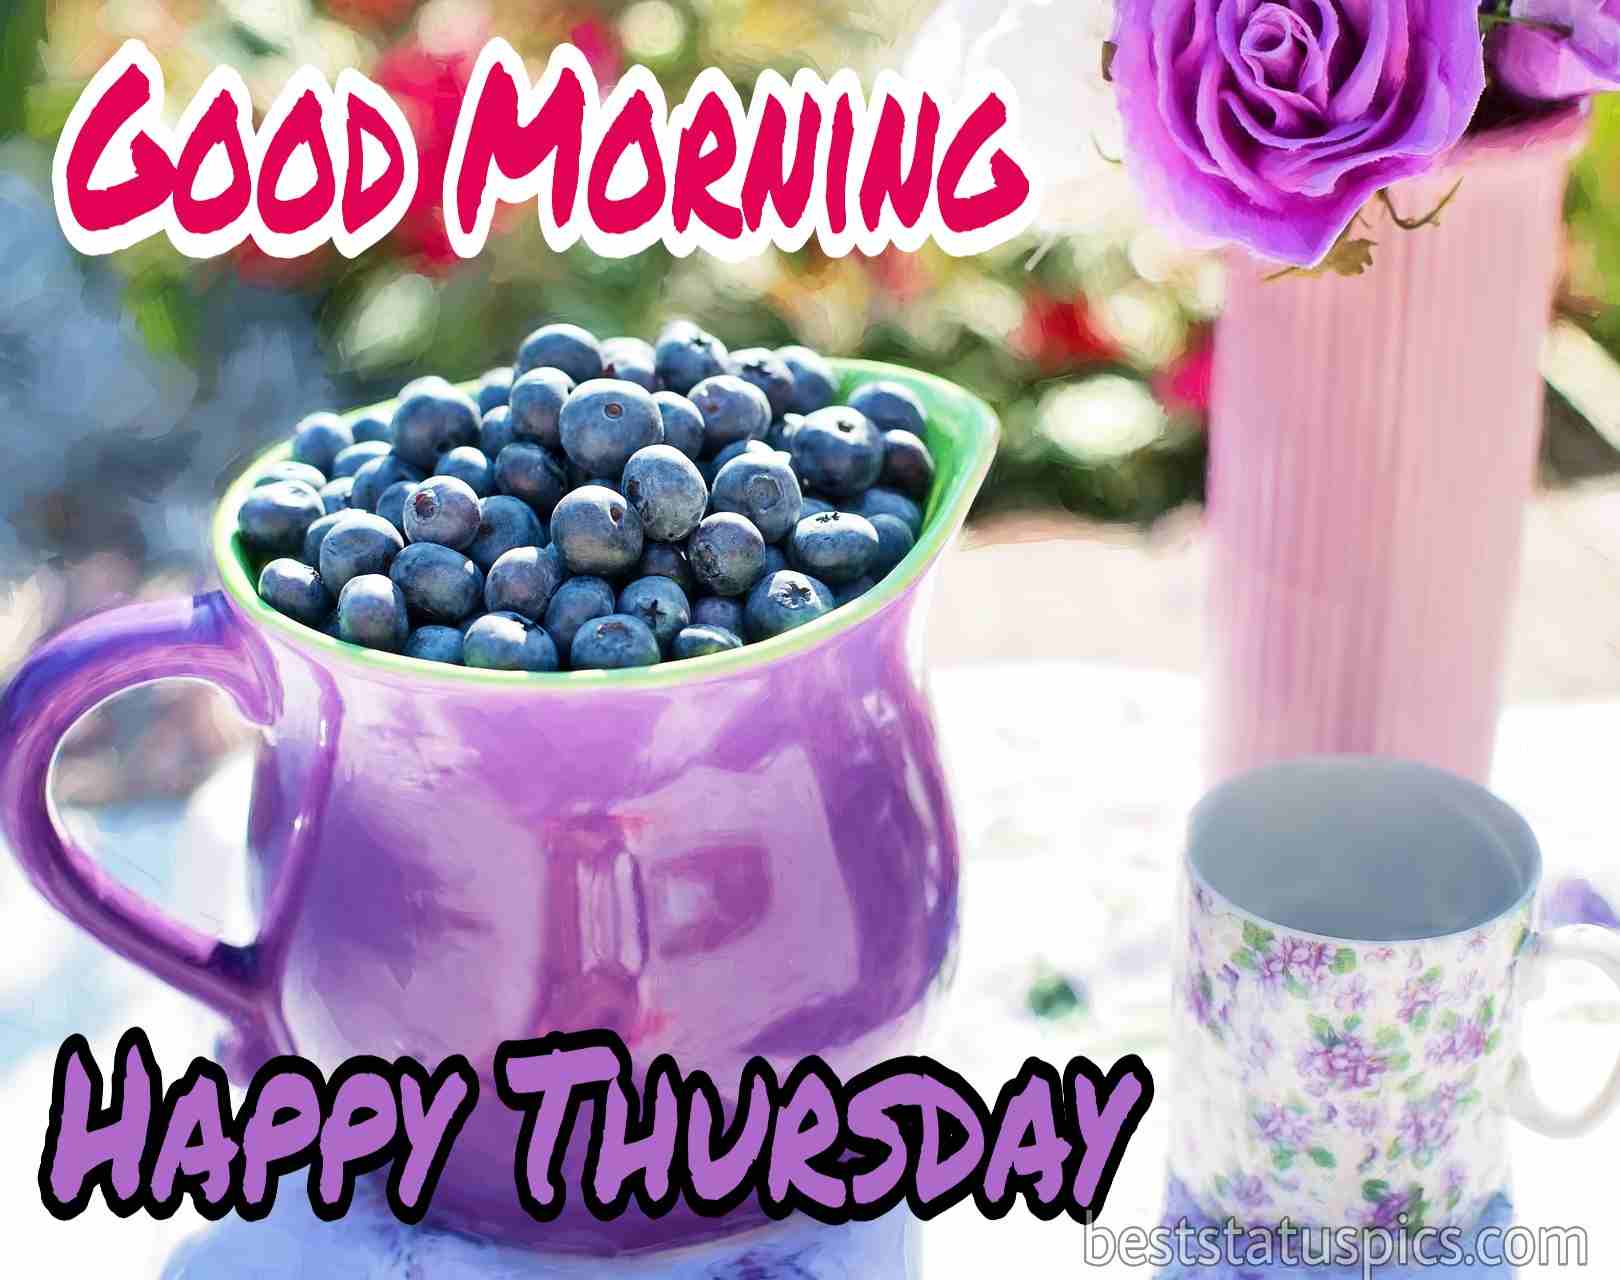 33+ Good Morning Happy Thursday Images, Wishes, Quotes Best Status Pics